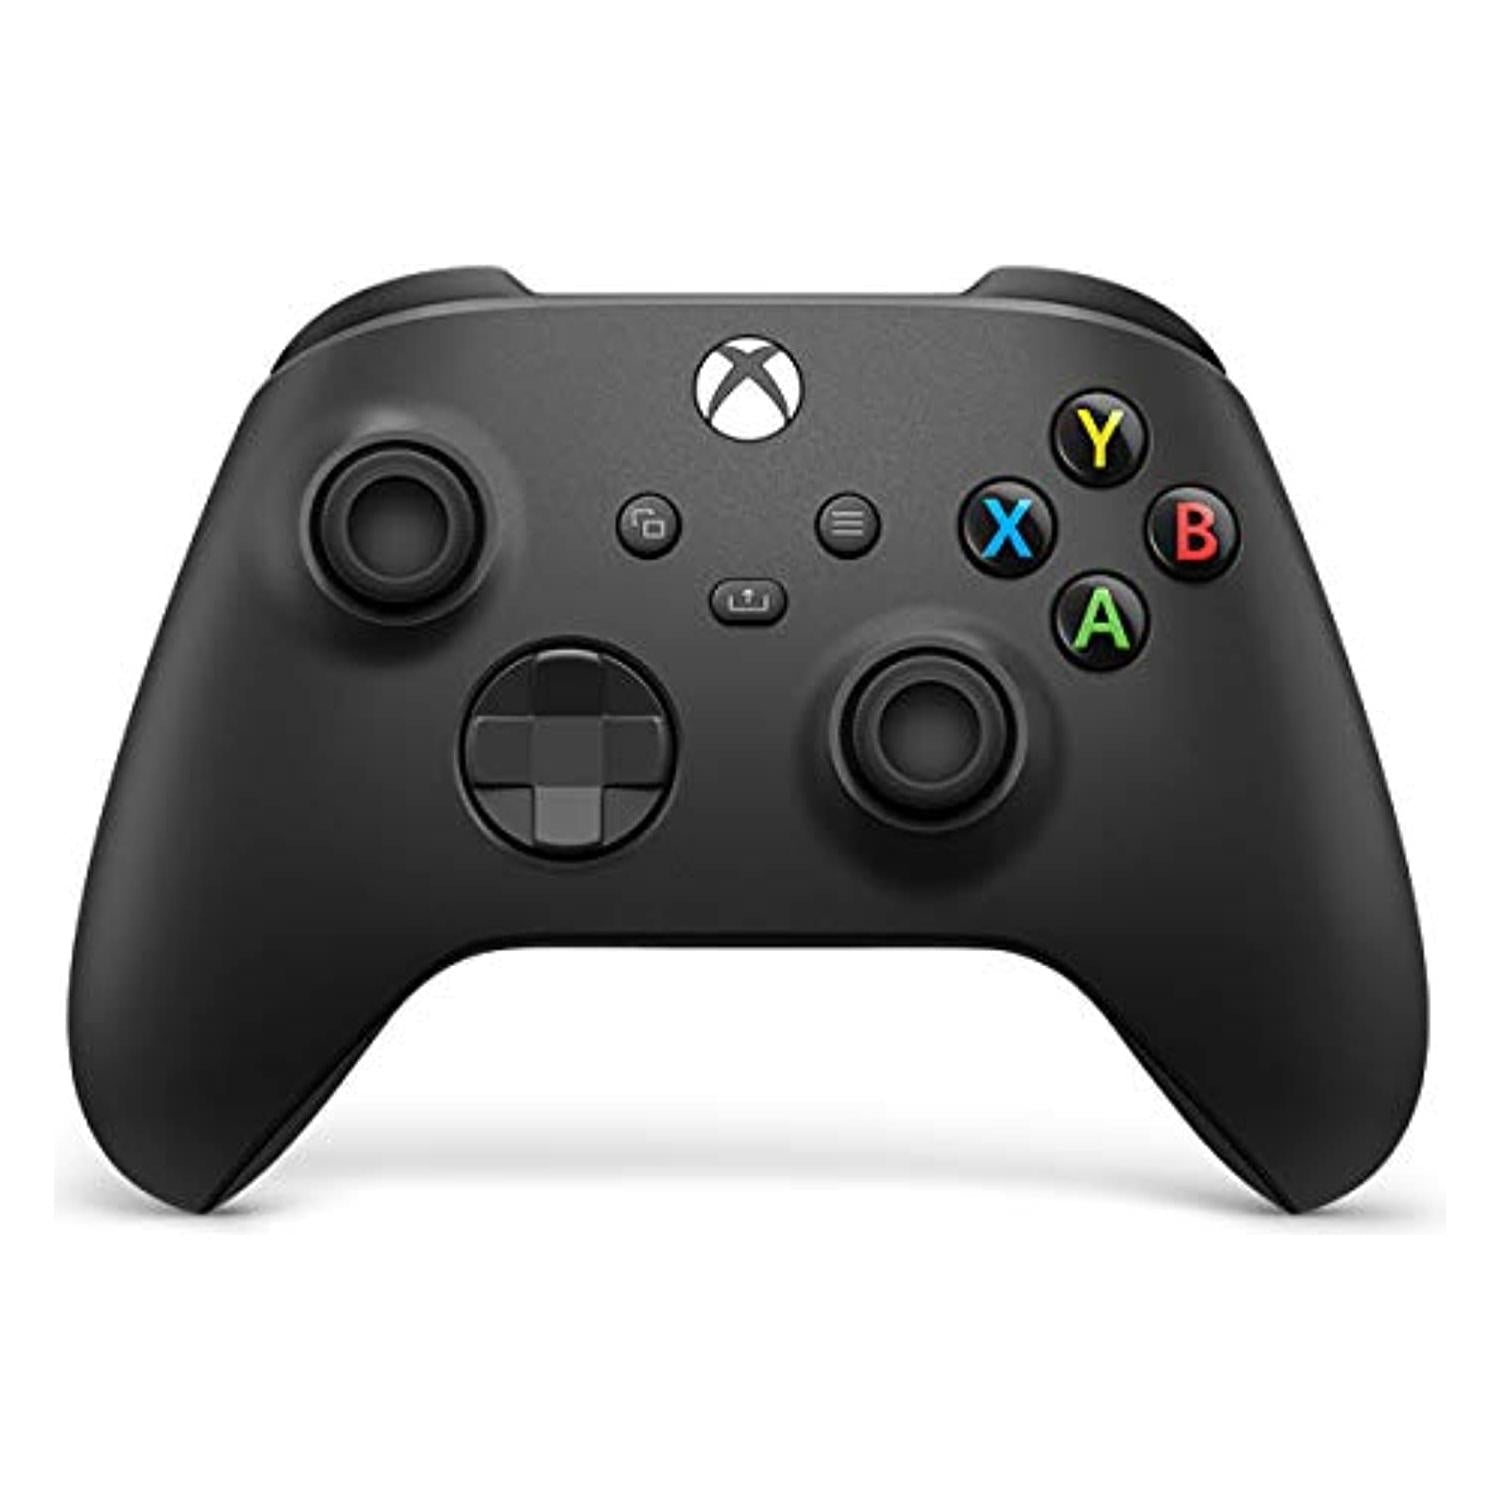 Microsoft Official Xbox Series X/S Wireless Controller